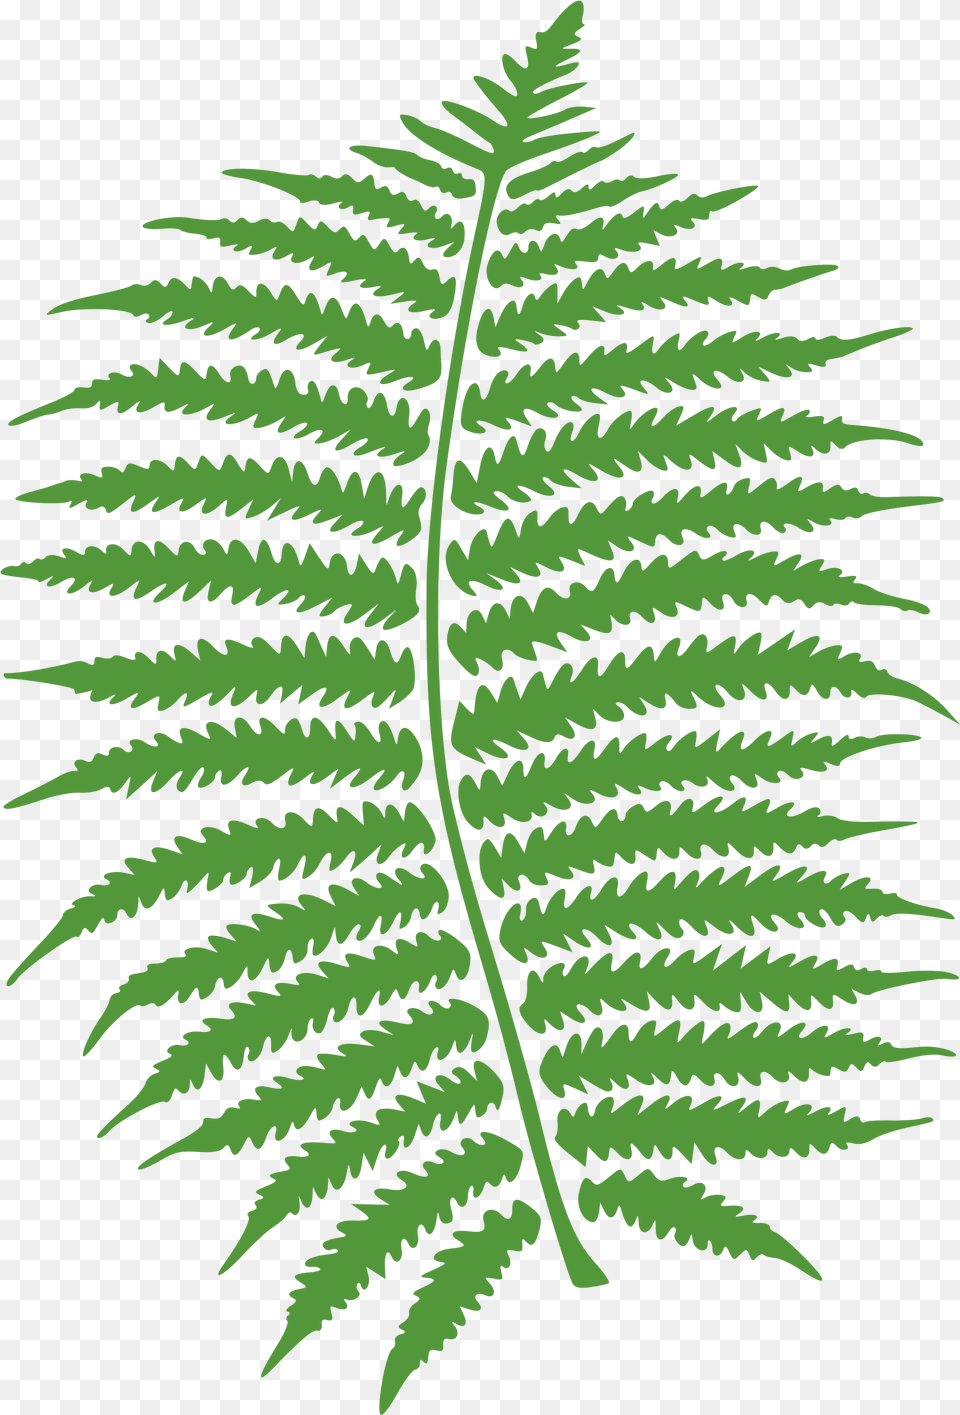 Hd Watercolor Vector Fern Fern Clipart Black And White, Plant, Animal, Dinosaur, Reptile Free Transparent Png